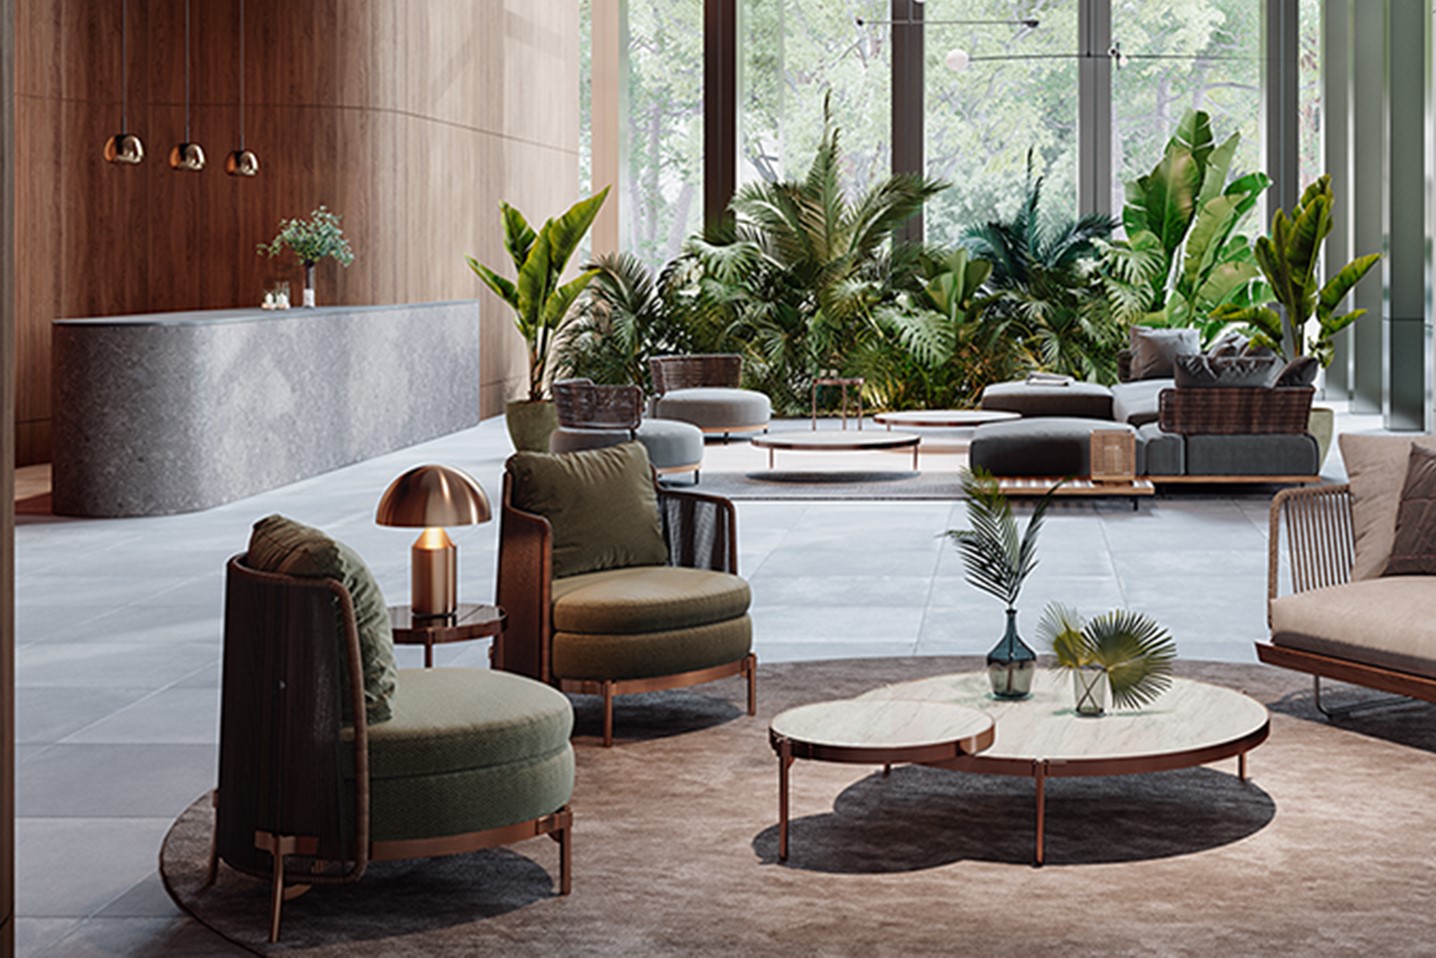 seating centred on a round carpet with hotel reception desk and plants in the background